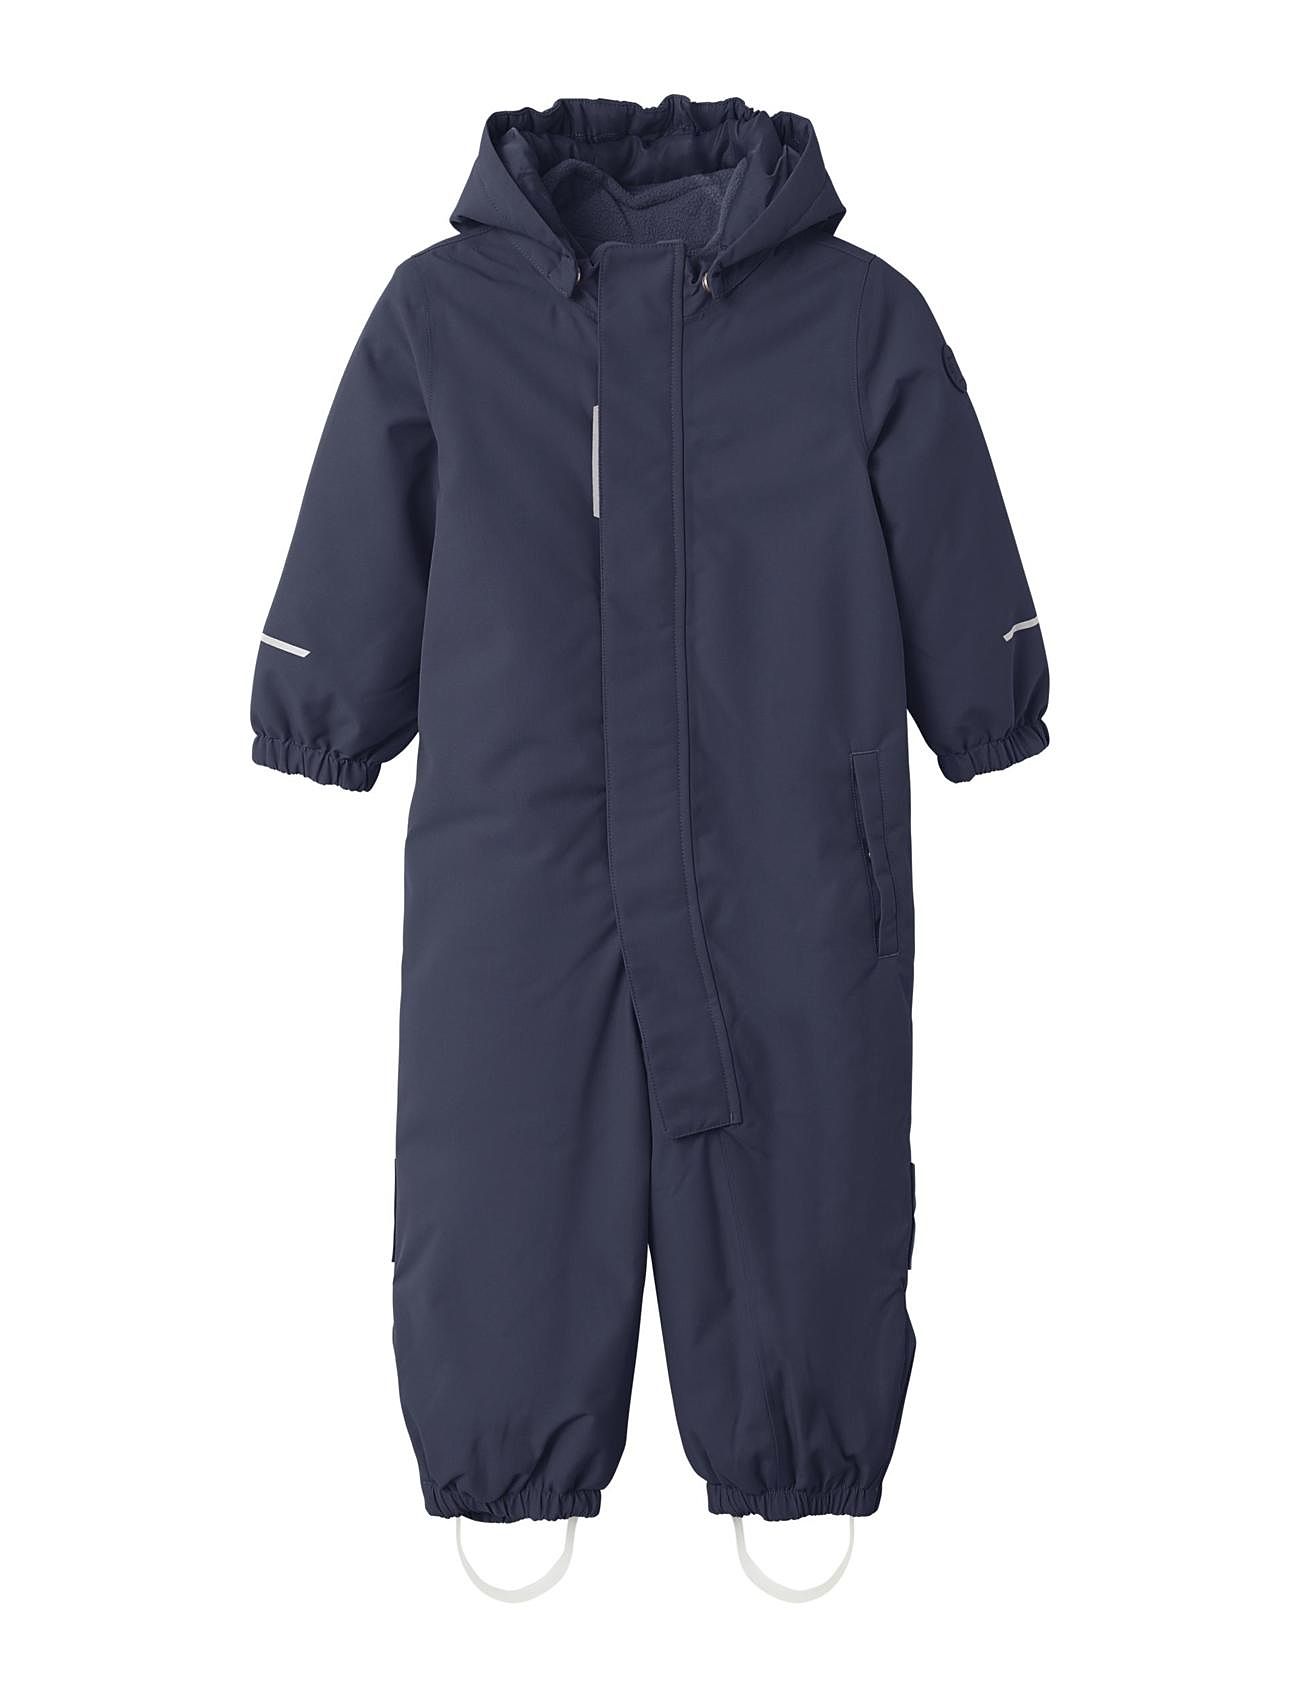 name it Nmnsnow10 Suit 1fo easy Coveralls returns Noos delivery €. - Boozt.com. Fast and from name online at Buy Solid 50.00 it